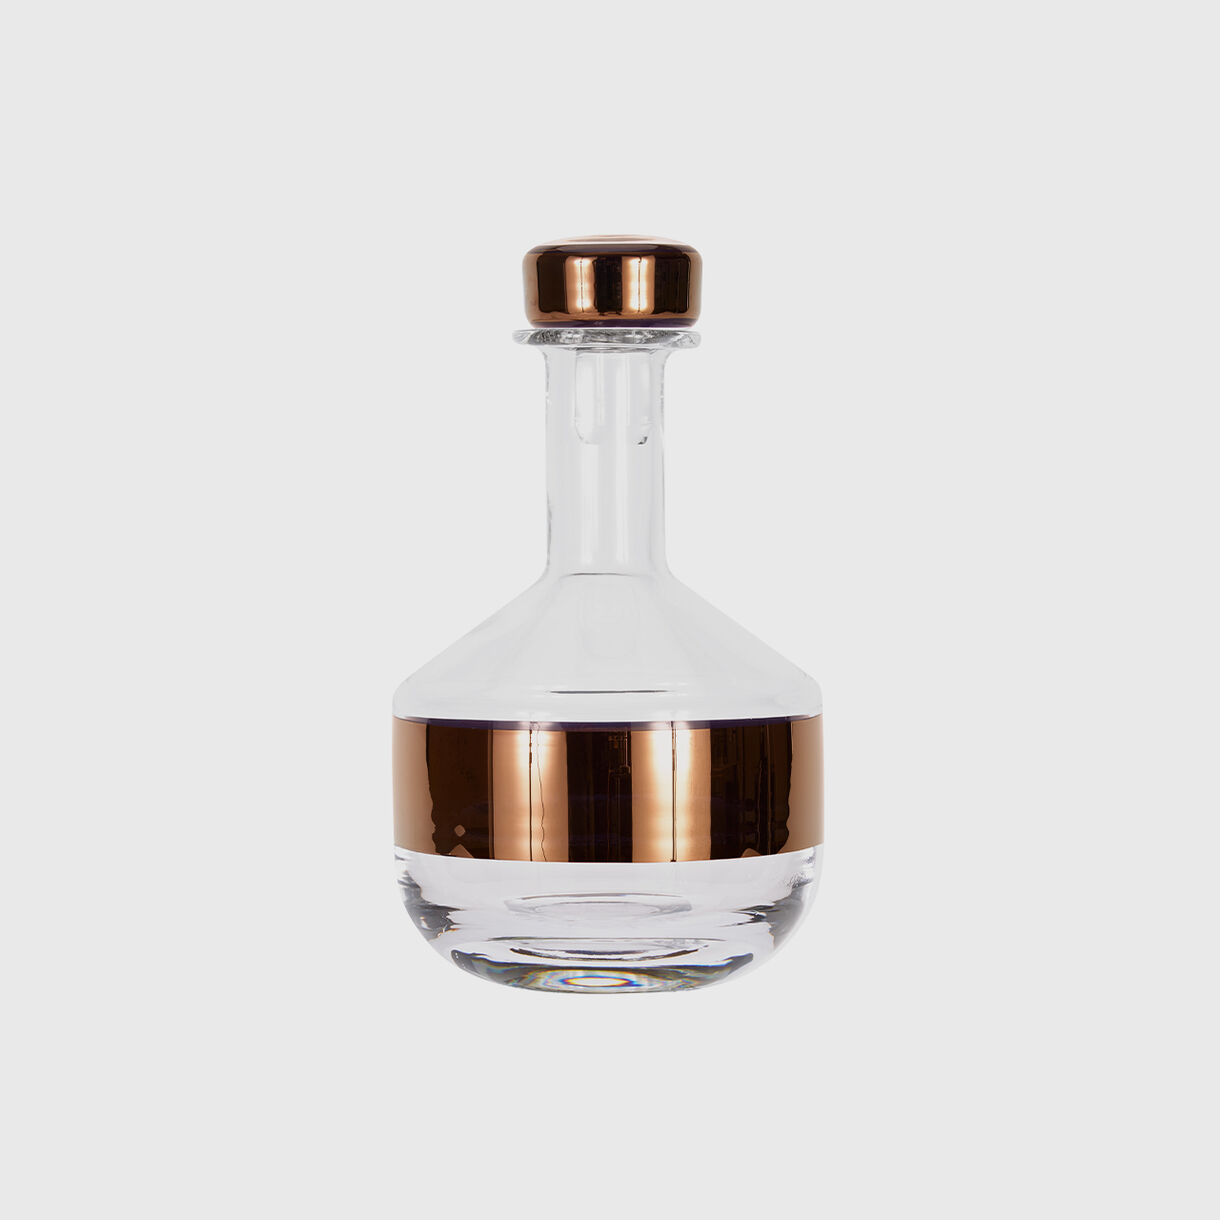 Tank Whiskey Decanter, Copper